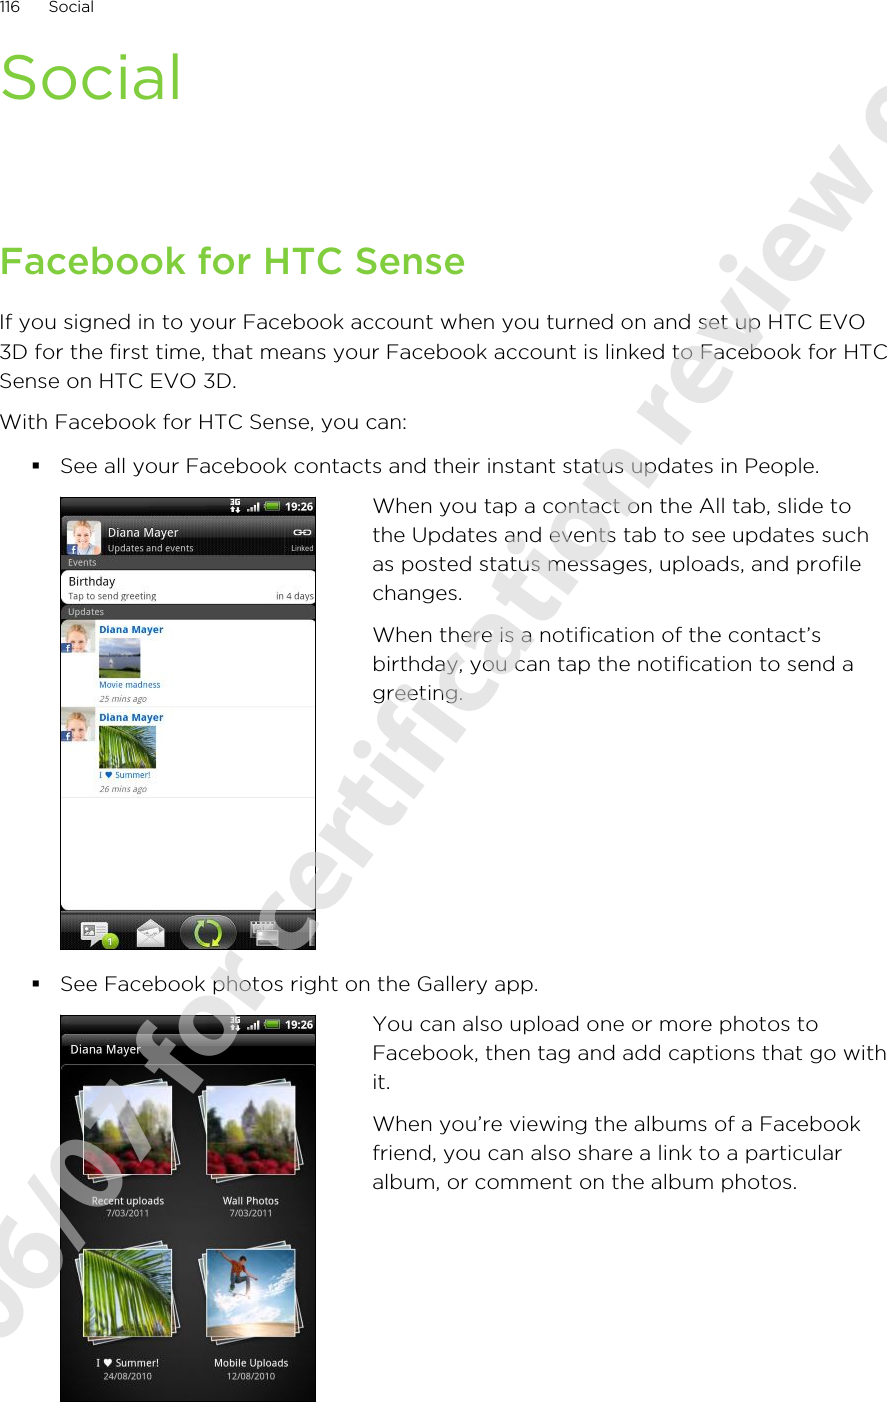 SocialFacebook for HTC SenseIf you signed in to your Facebook account when you turned on and set up HTC EVO3D for the first time, that means your Facebook account is linked to Facebook for HTCSense on HTC EVO 3D.With Facebook for HTC Sense, you can:§See all your Facebook contacts and their instant status updates in People.When you tap a contact on the All tab, slide tothe Updates and events tab to see updates suchas posted status messages, uploads, and profilechanges.When there is a notification of the contact’sbirthday, you can tap the notification to send agreeting.§See Facebook photos right on the Gallery app.You can also upload one or more photos toFacebook, then tag and add captions that go withit.When you’re viewing the albums of a Facebookfriend, you can also share a link to a particularalbum, or comment on the album photos.116 Social2011/06/07 for certification review only